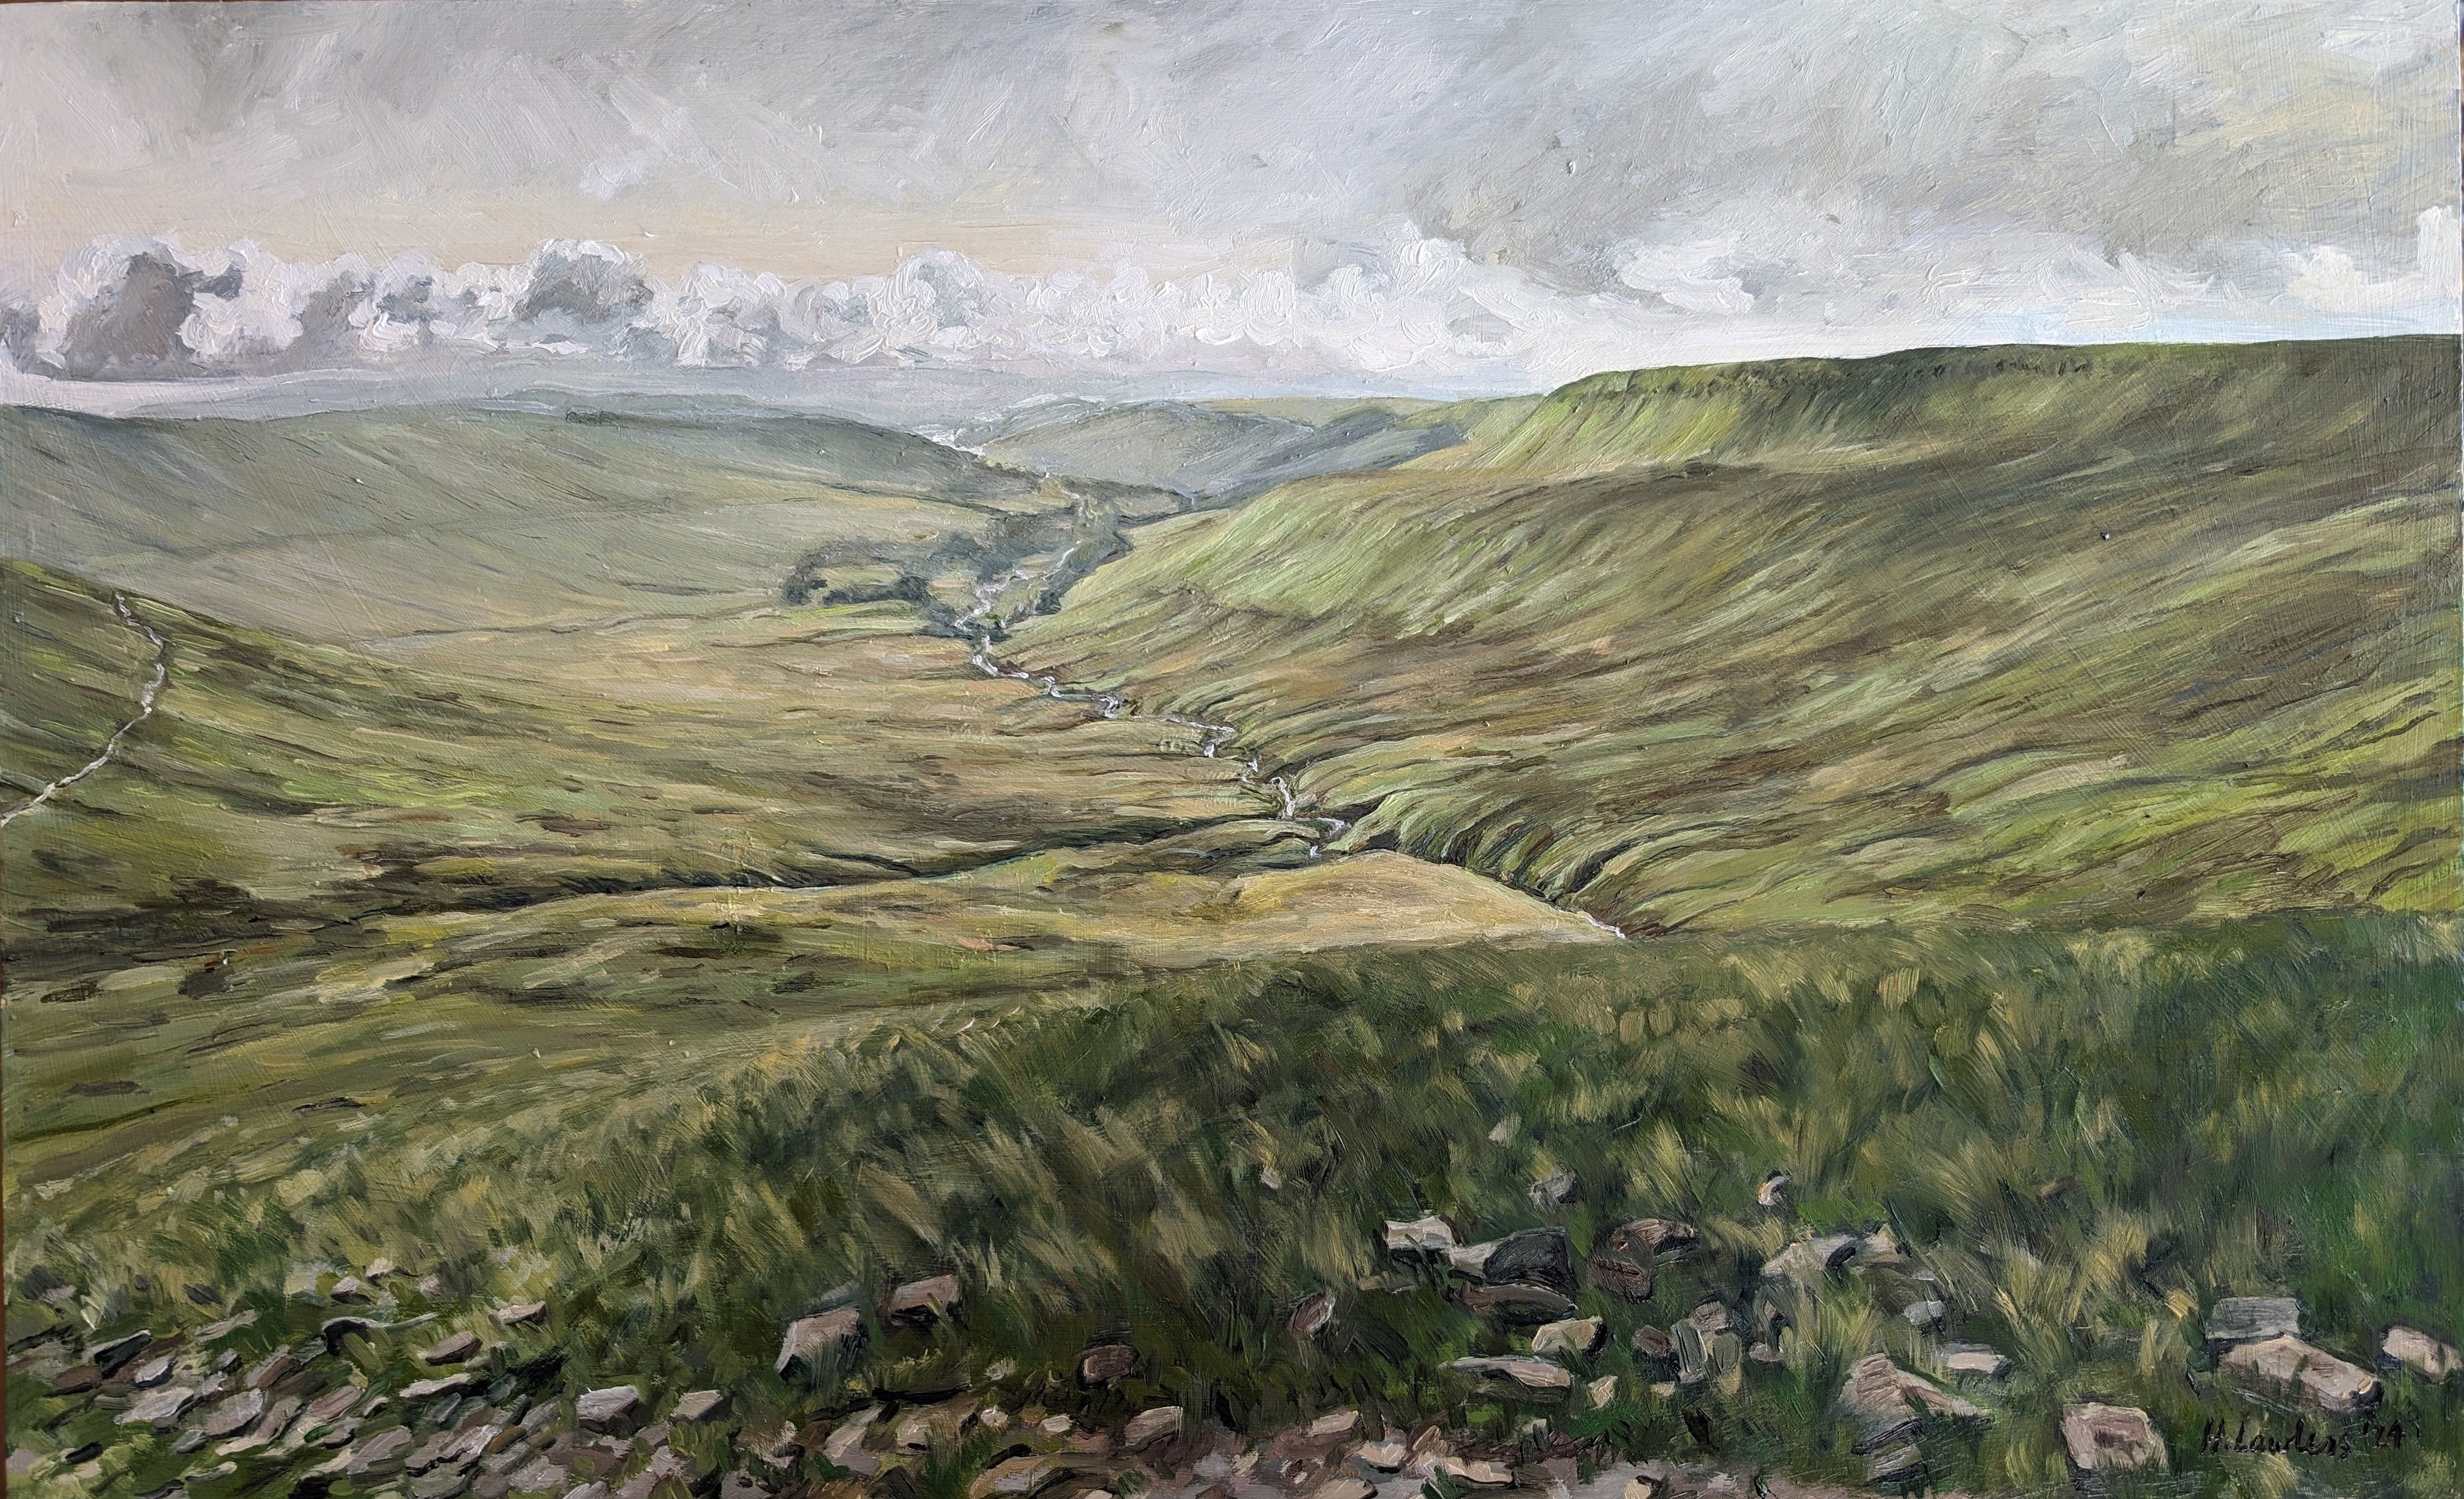 Morning Greens in the Brecon Beacons | Original Painting Original Paintings Harriet Lawless Artist wales